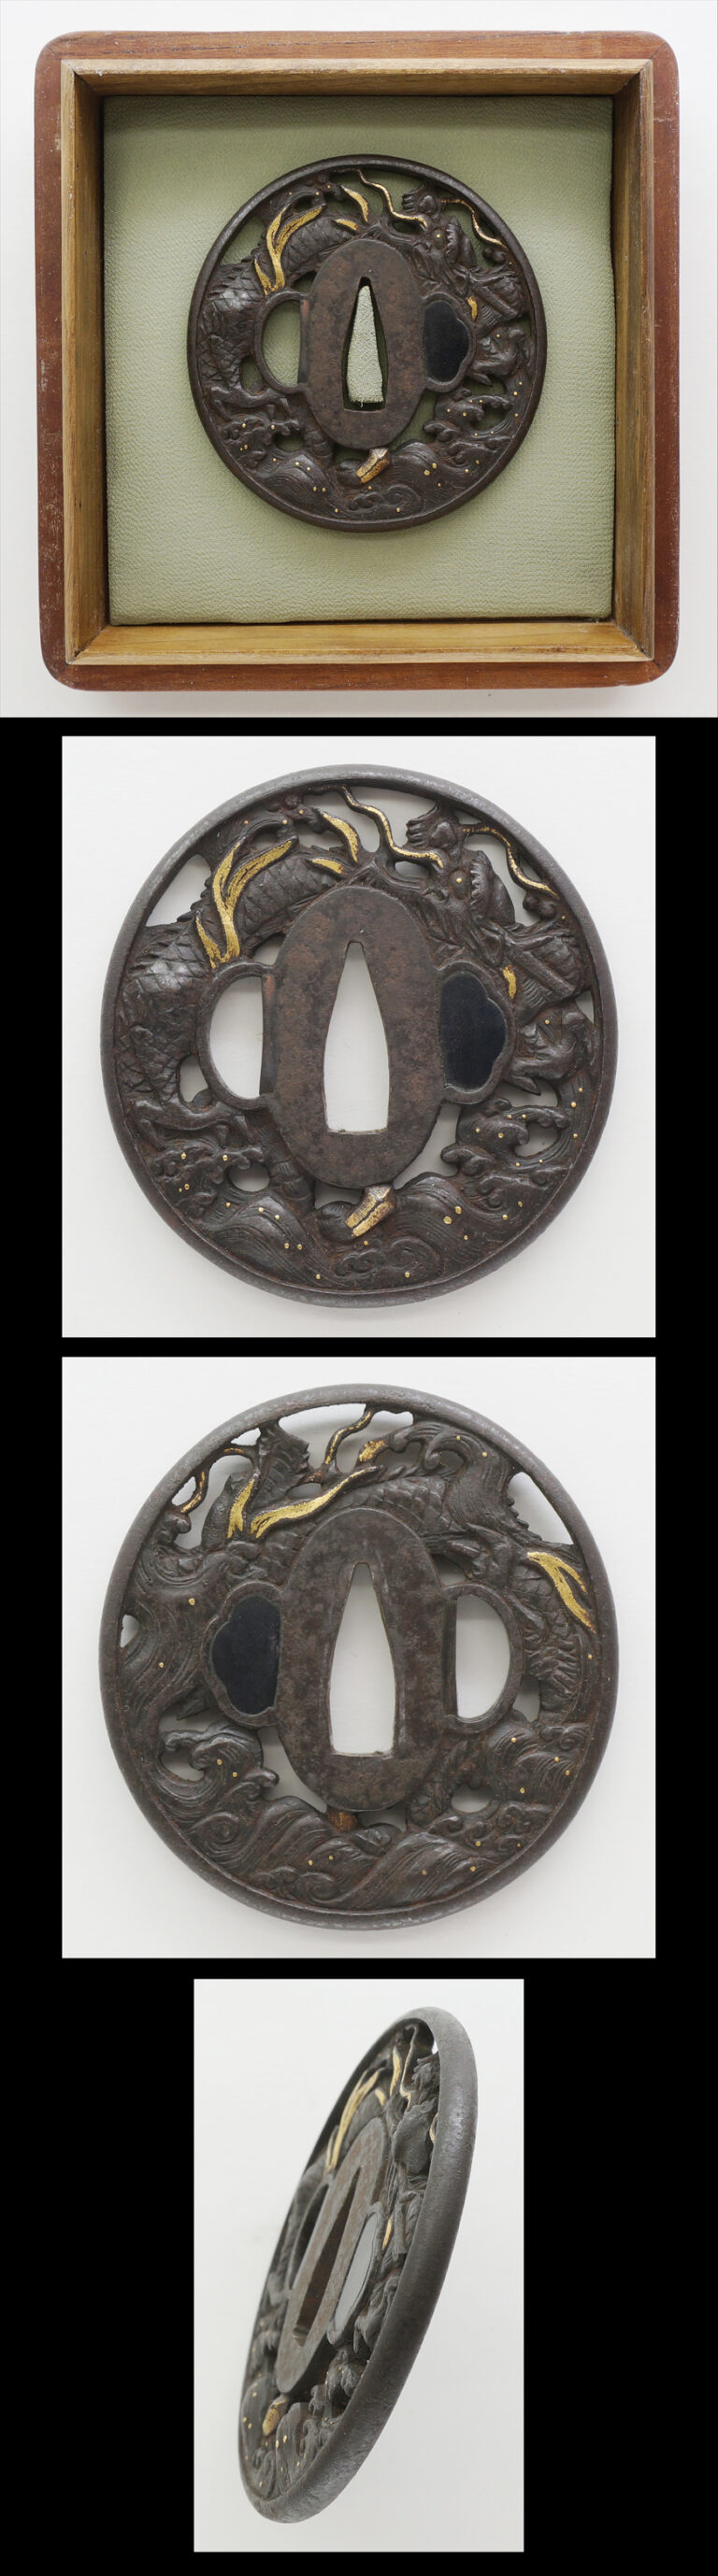 Tsuba : Mumei (A dragon and waves are engraved)